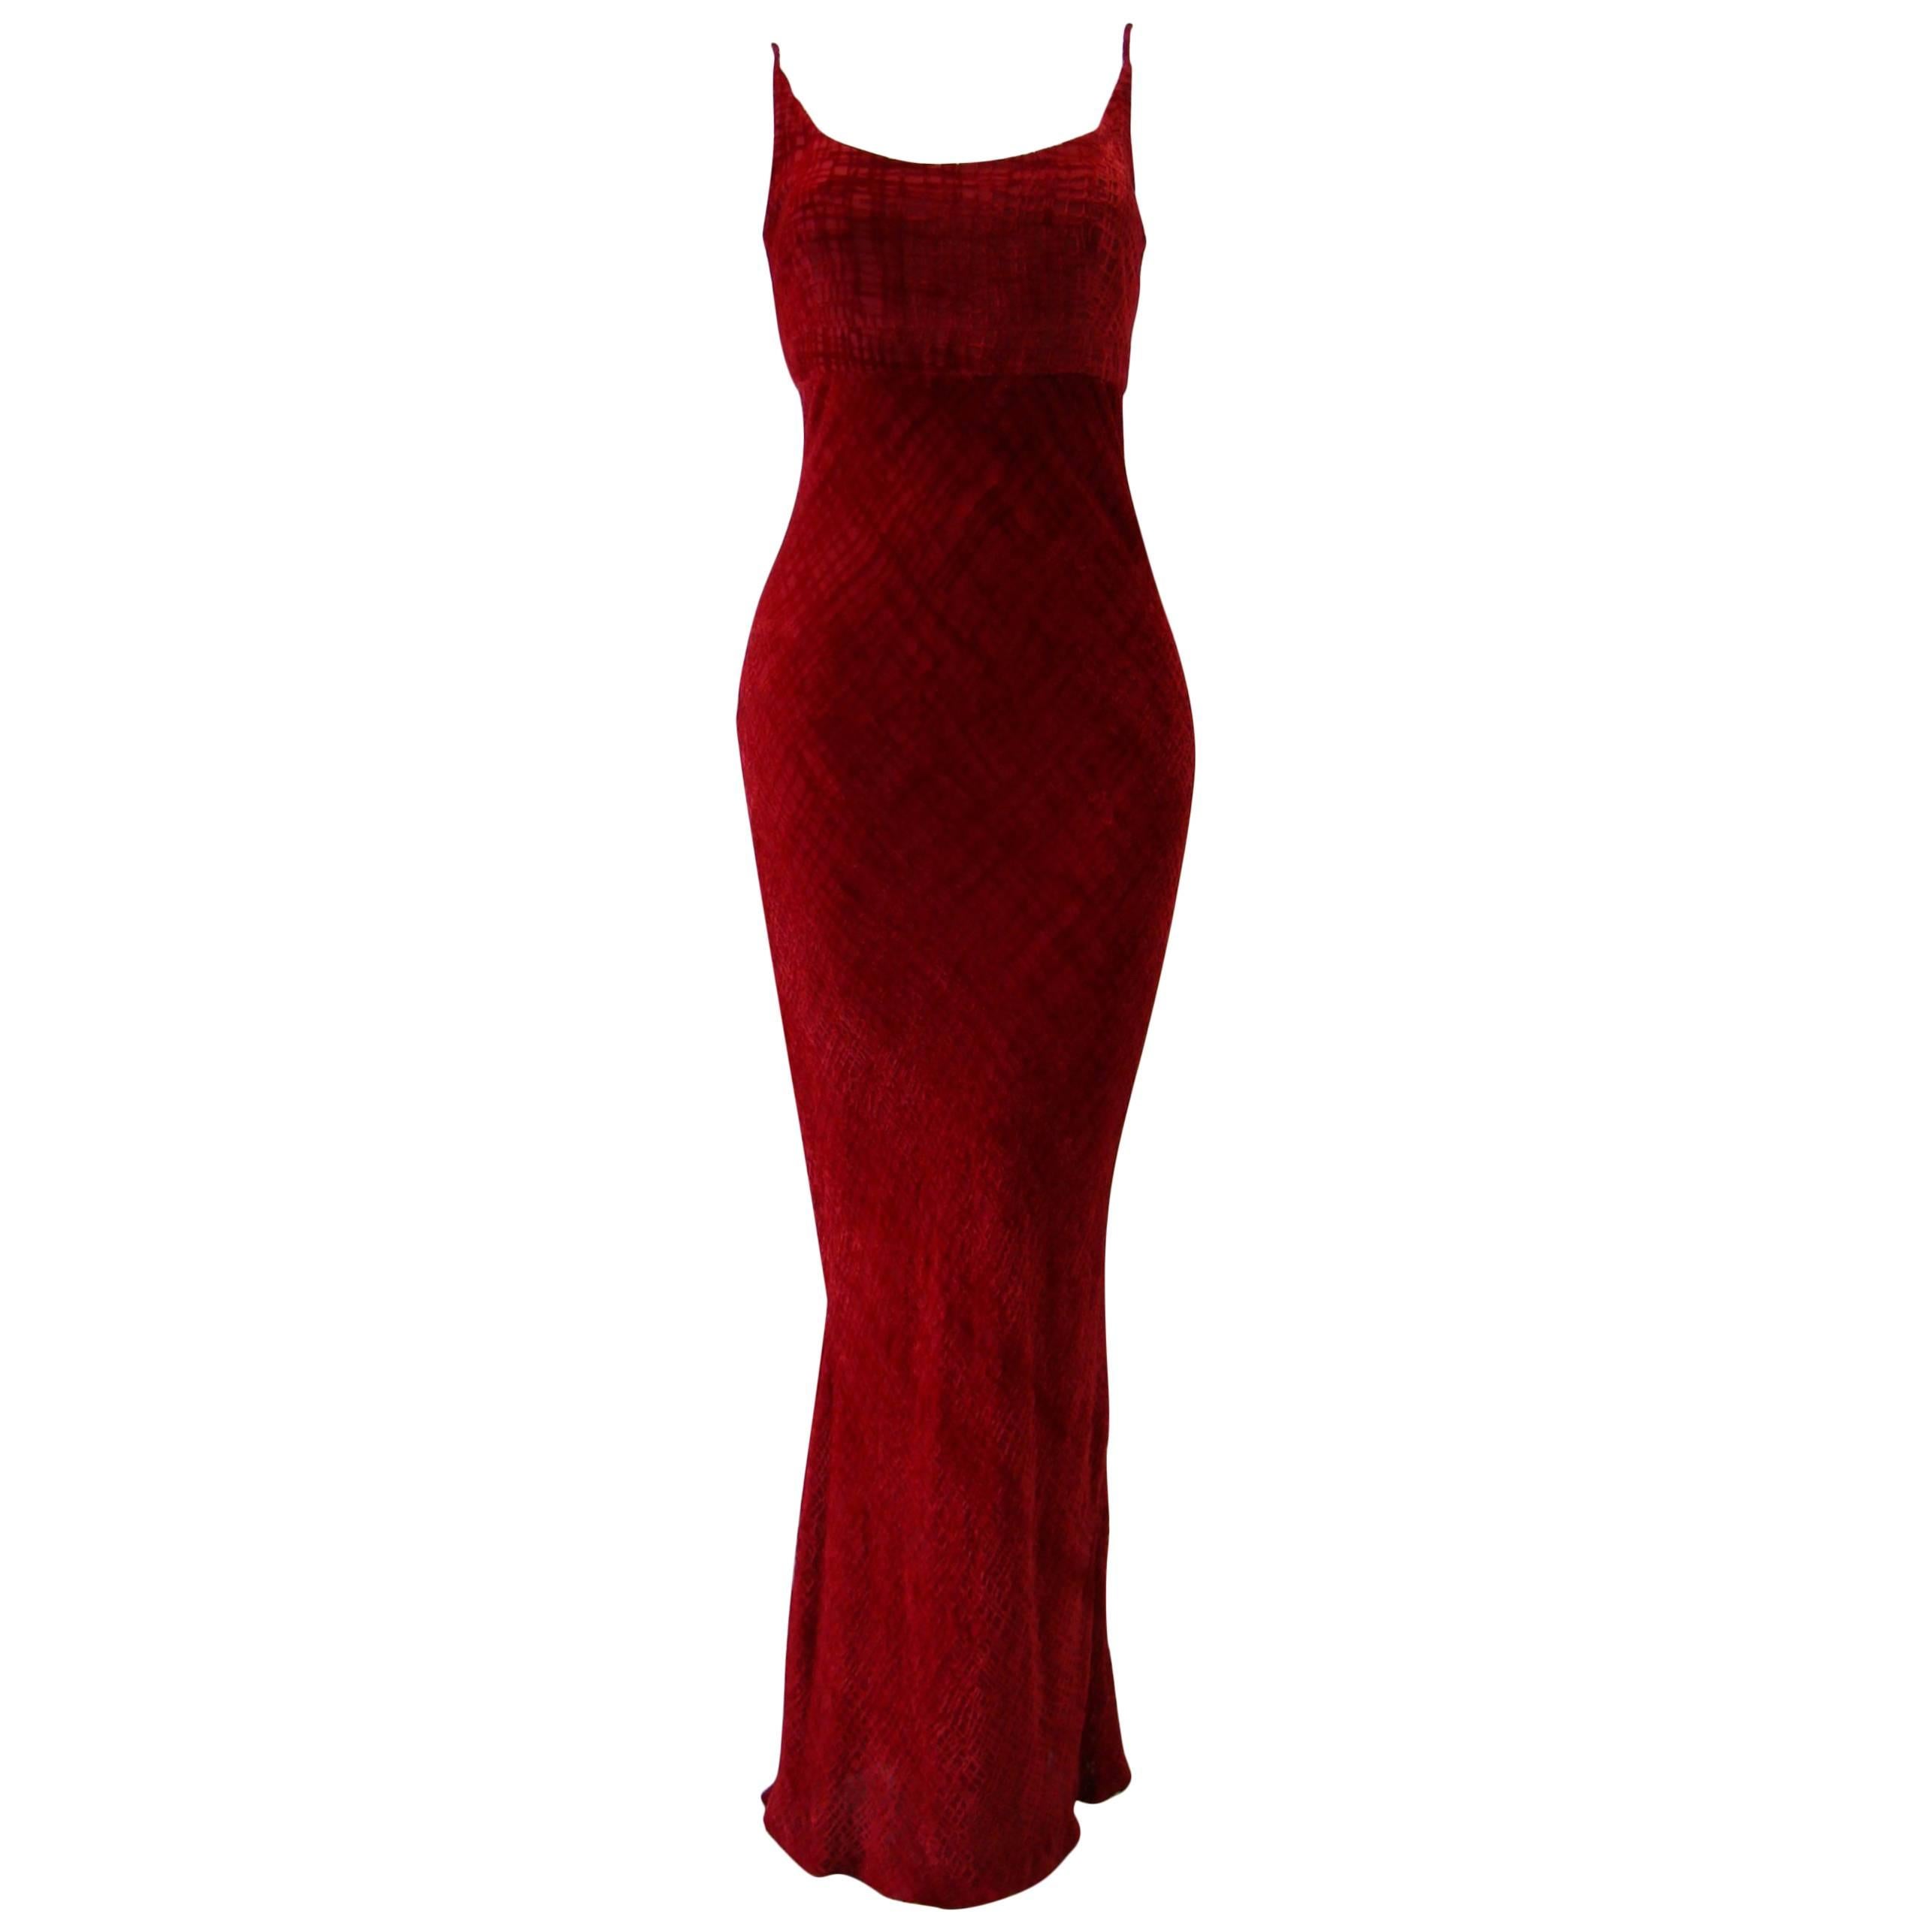 Unique Angelo Mozzillo Red Velvet Evening Gown Fall 1998 For Sale